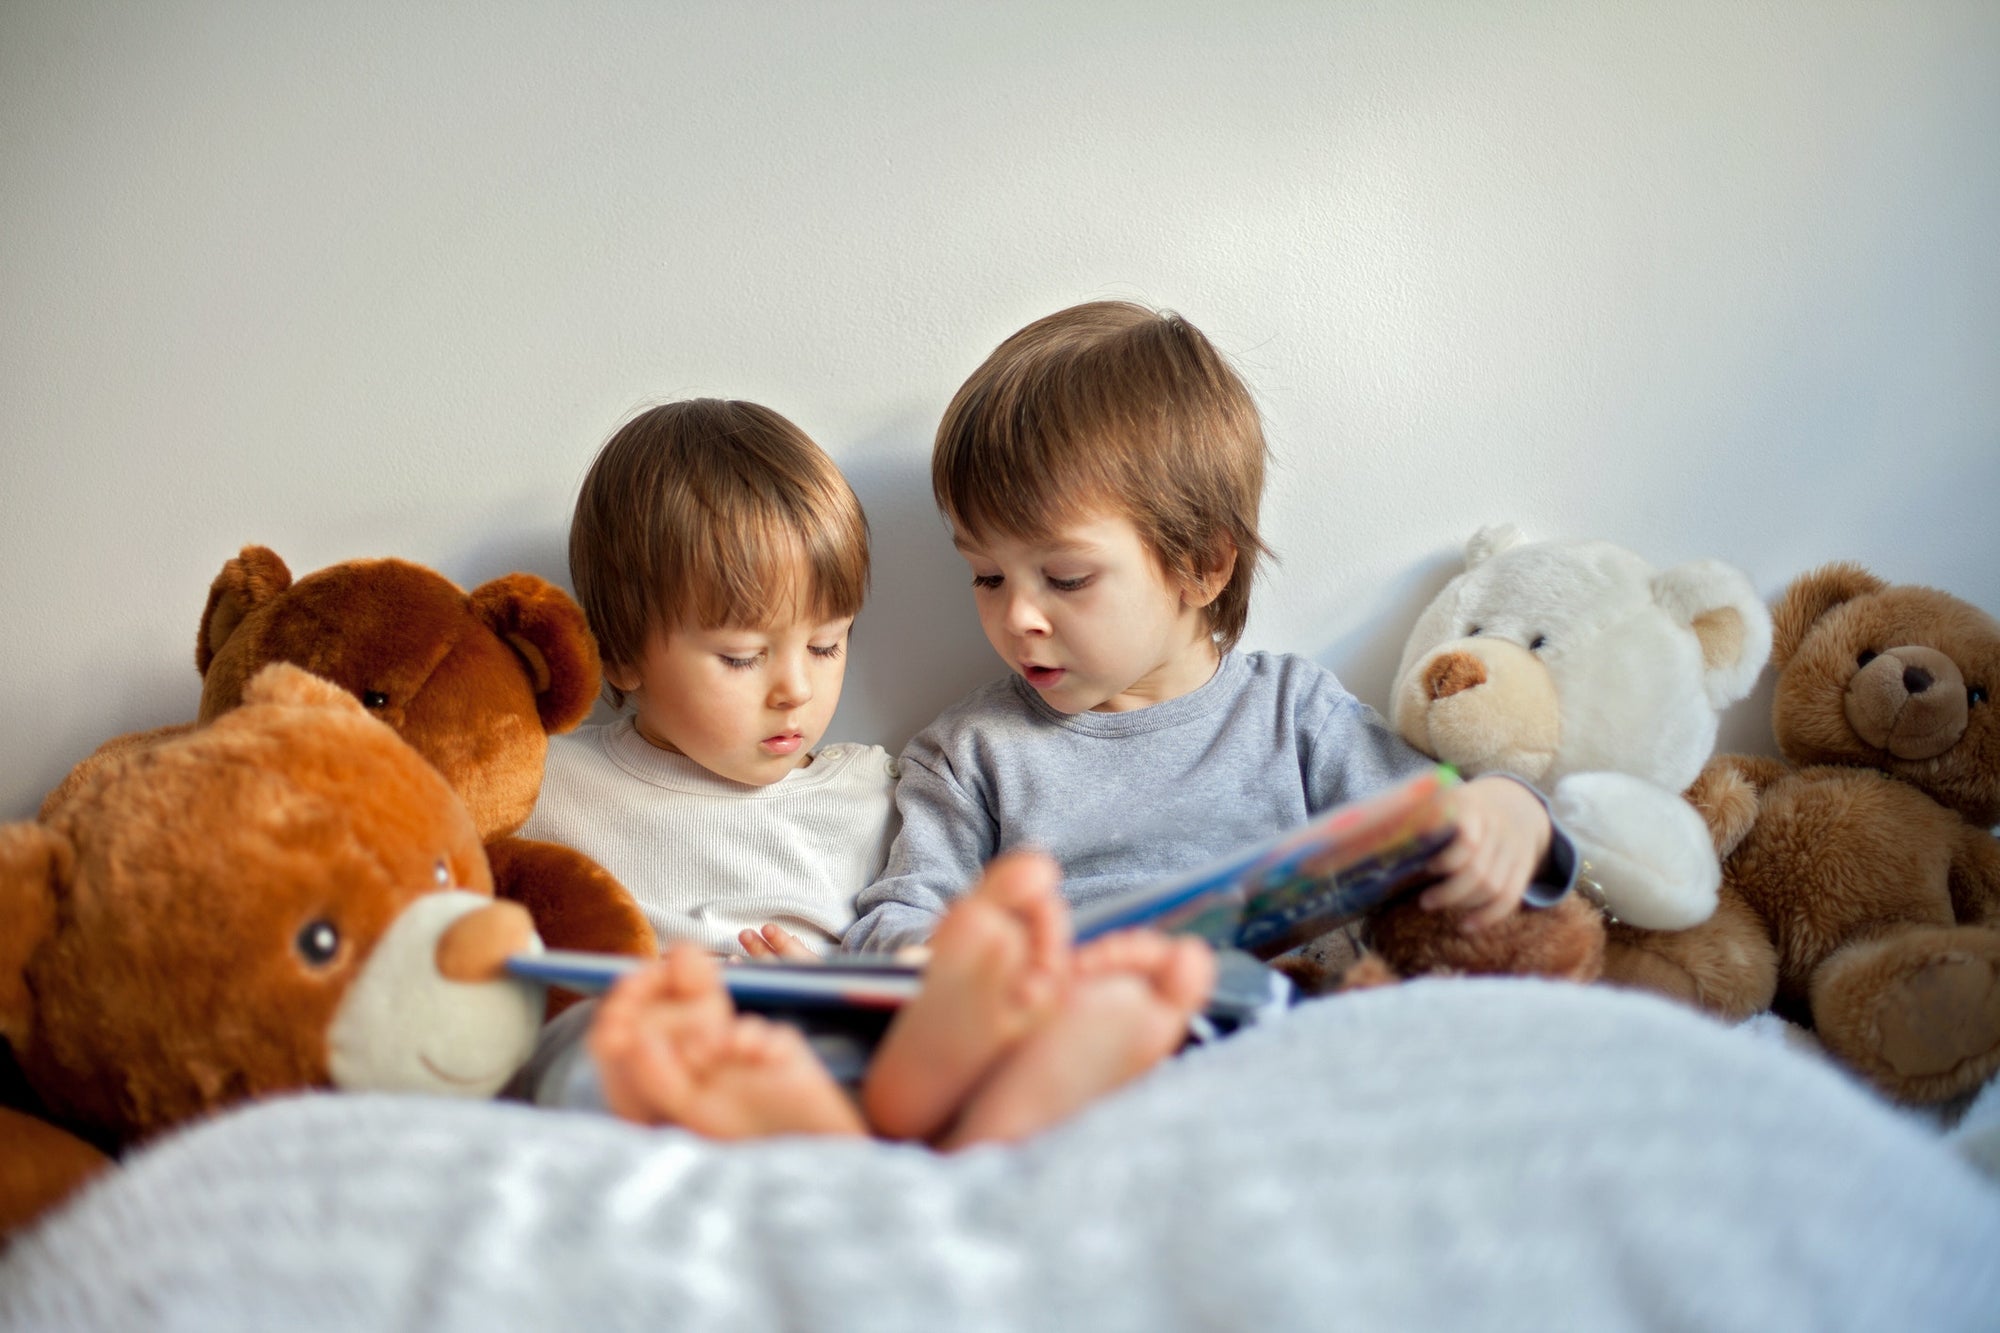 Two boys with teddy bears around, reading a book,